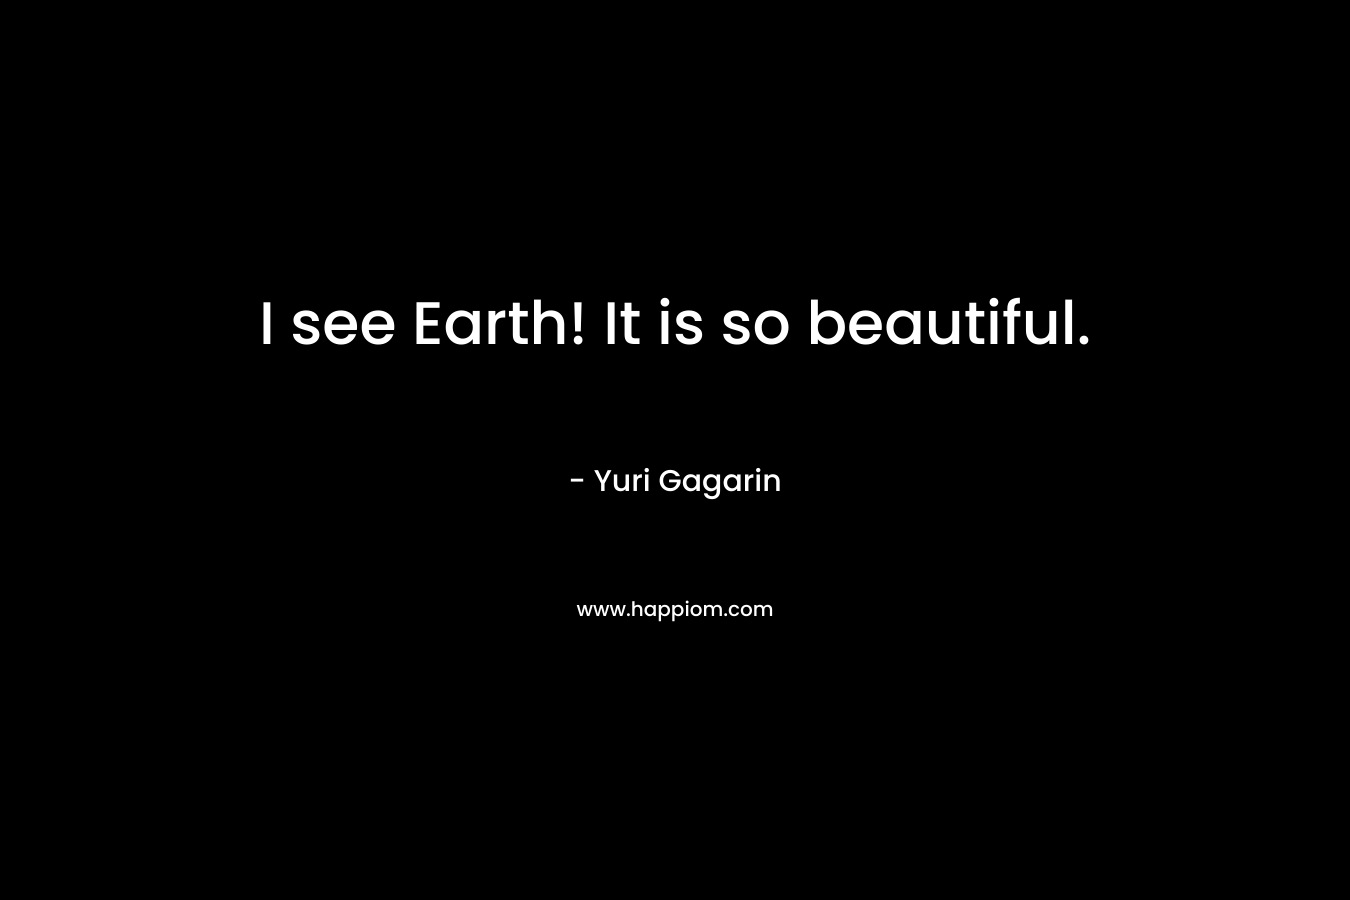 I see Earth! It is so beautiful.